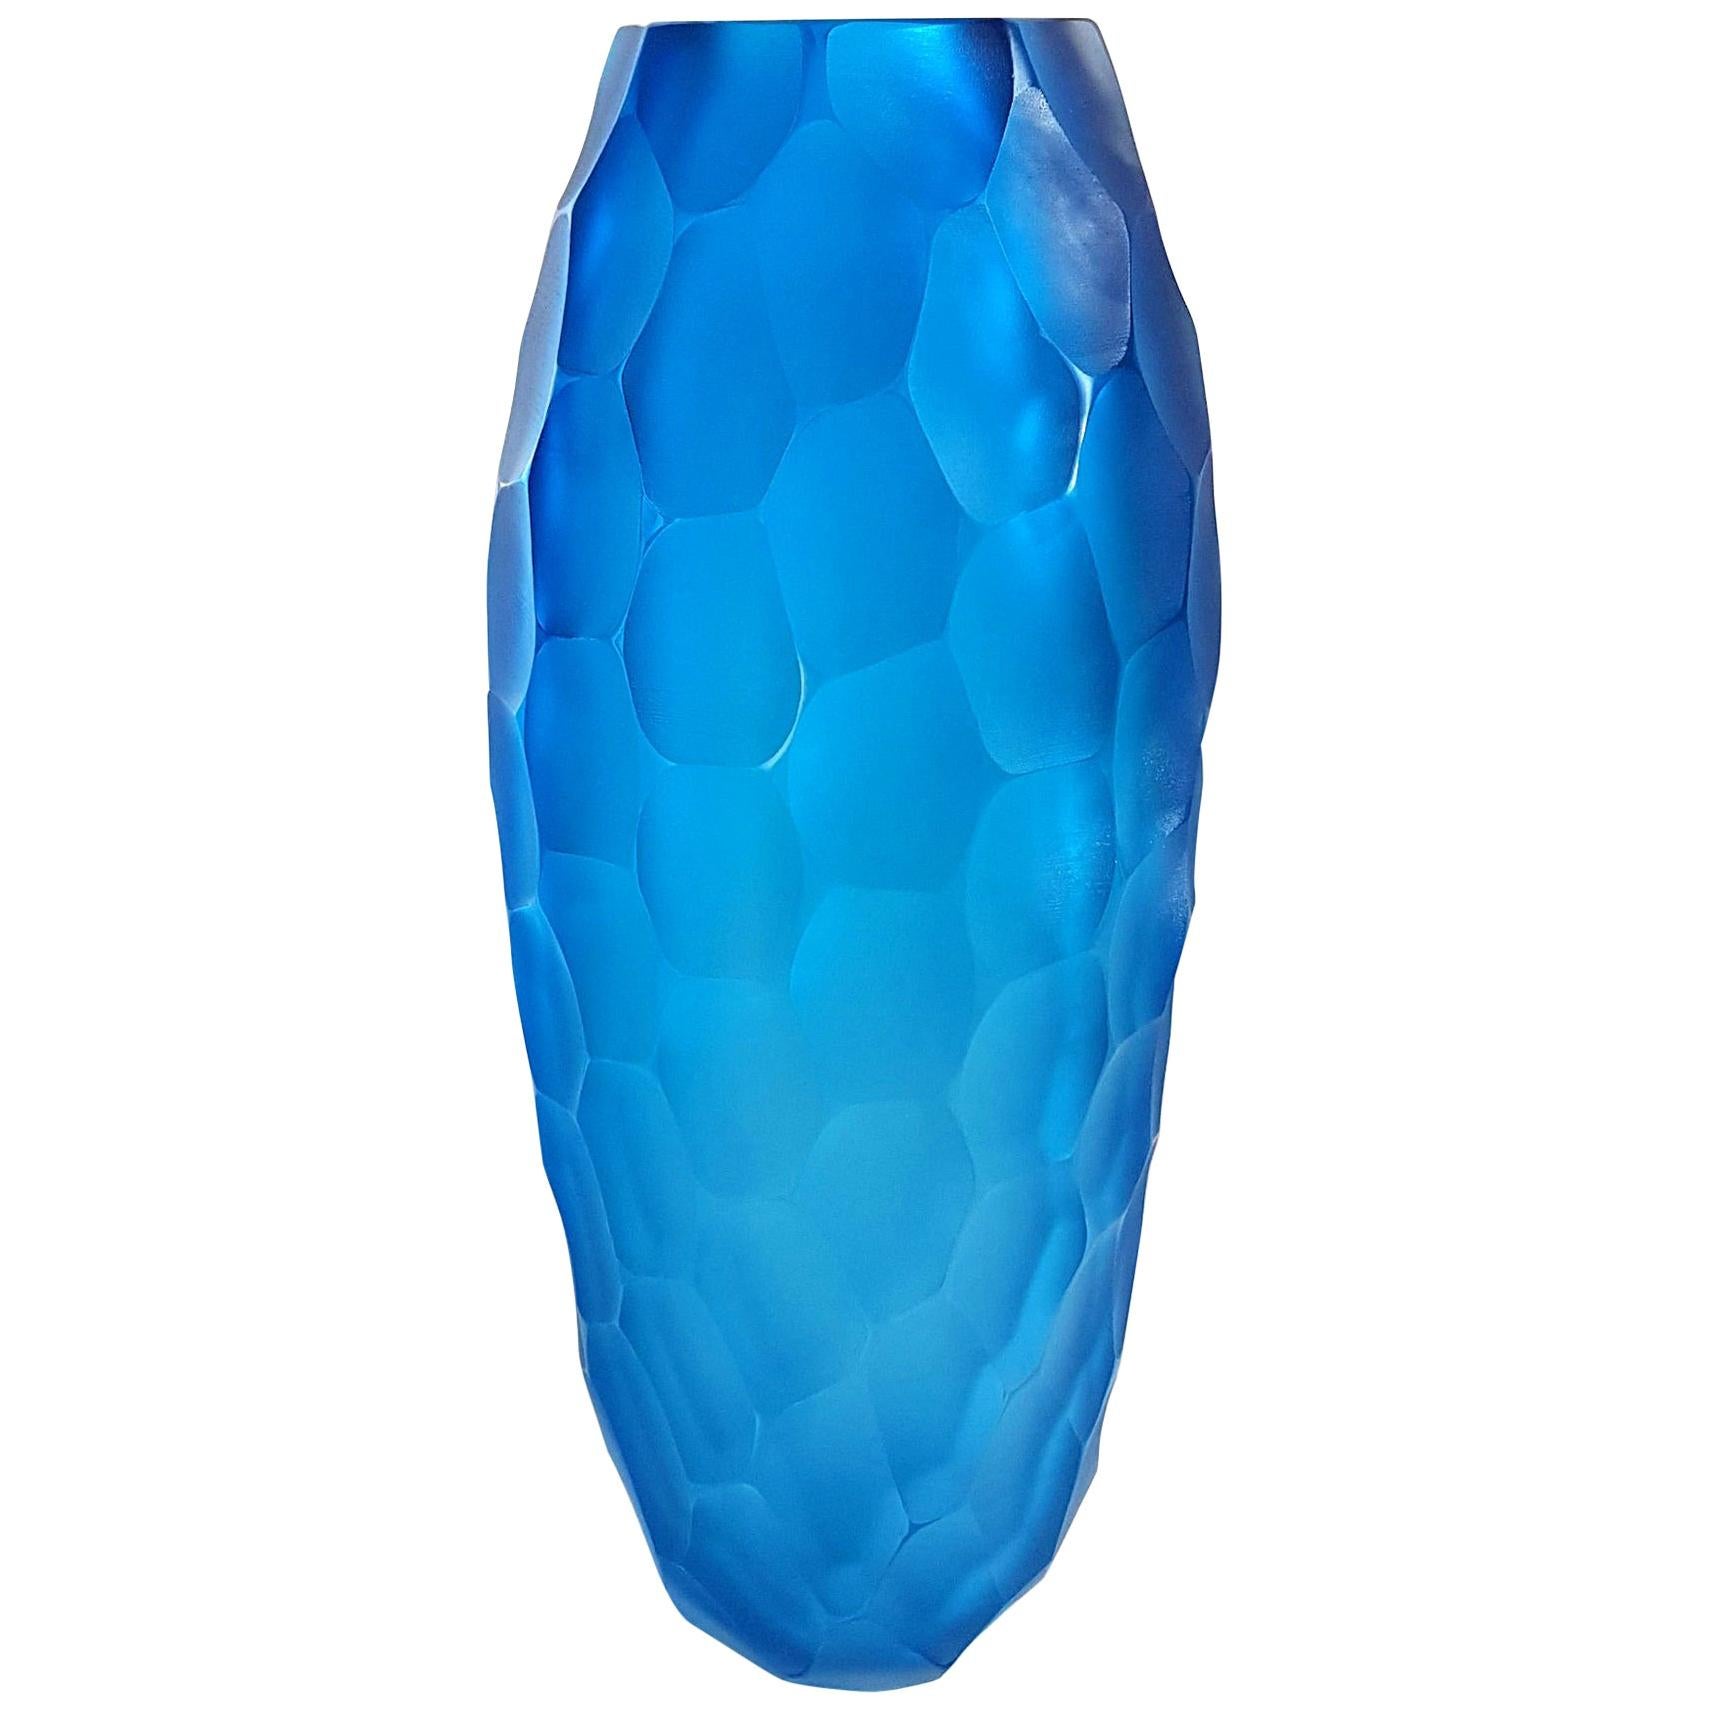 Large Mid-Century Modern Blue Faceted Murano Glass Vase by Simone Cenedese Italy